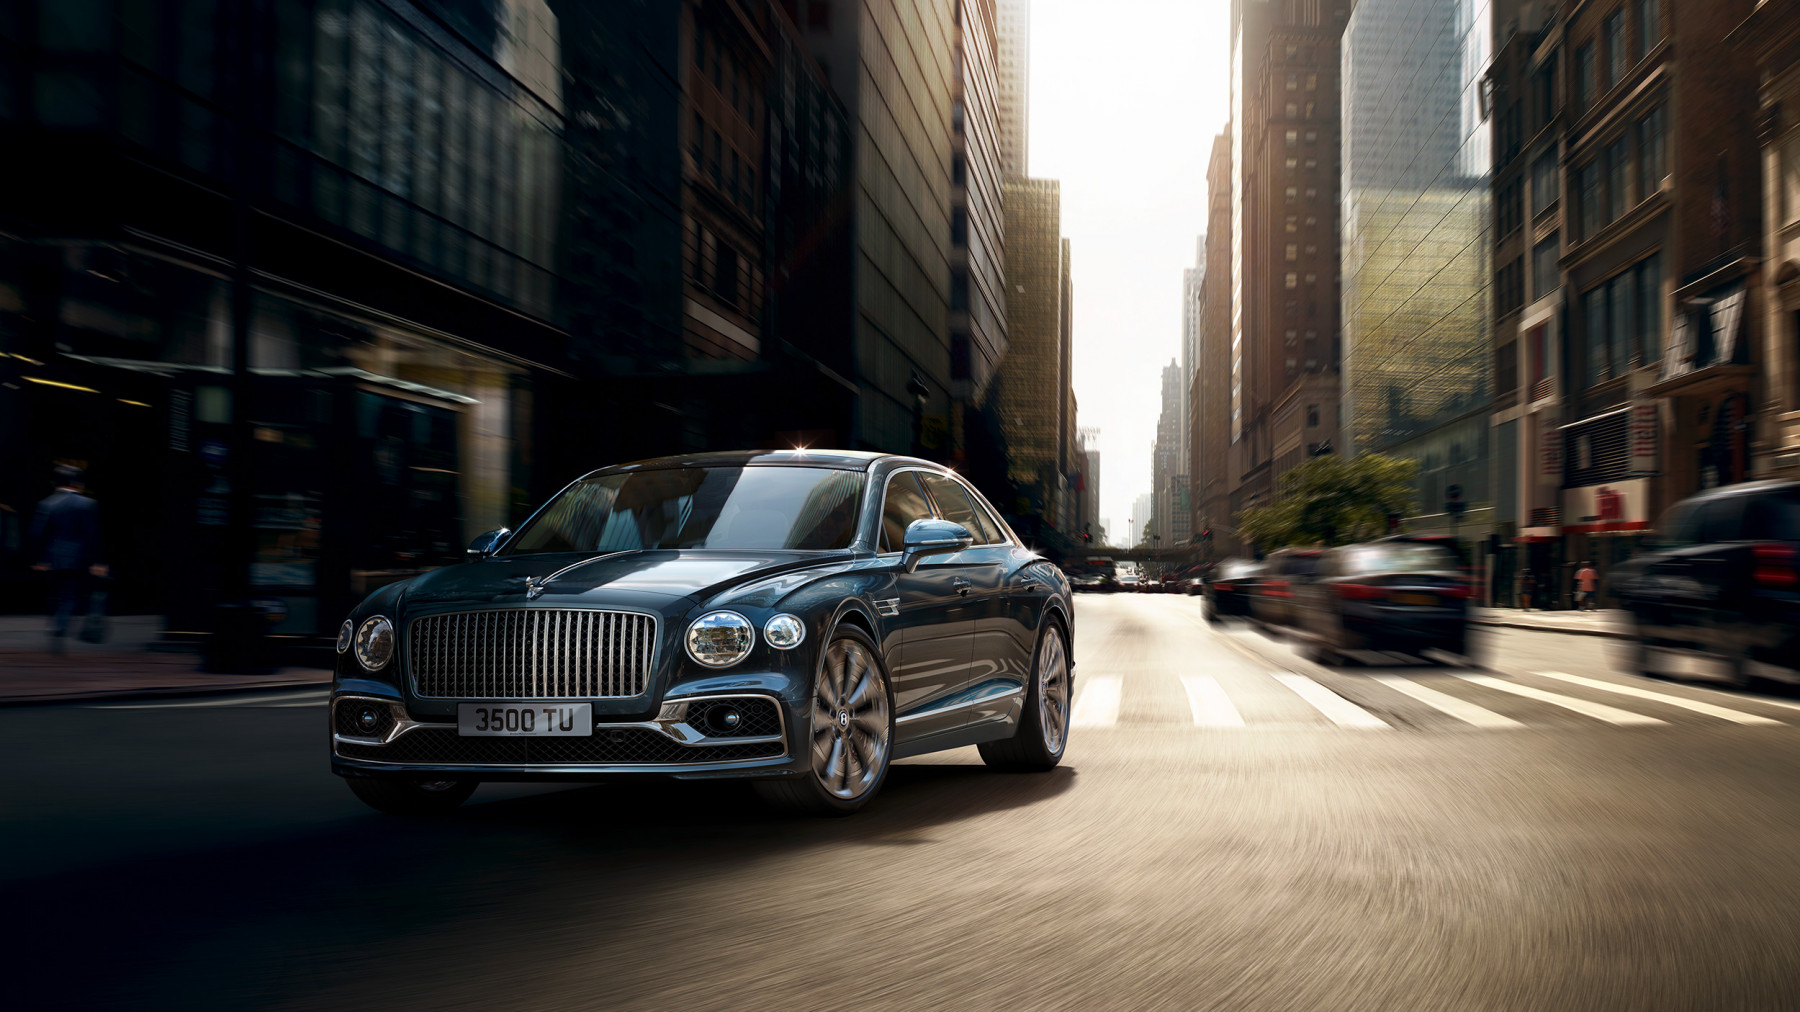 The new Bentley Flying Spur 3